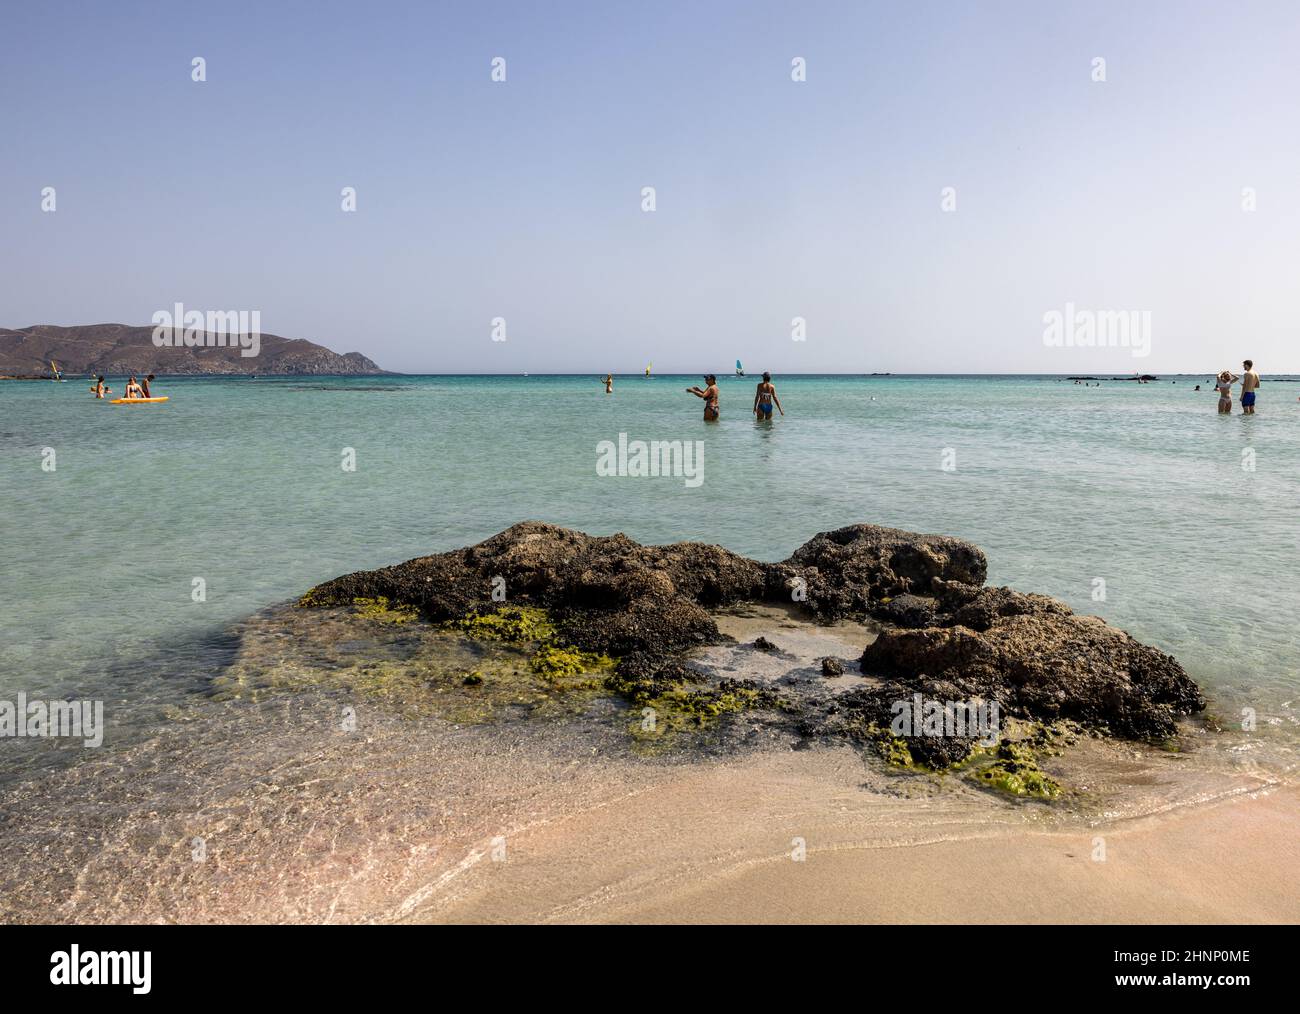 People relaxing on the famous pink coral beach of Elafonisi on Crete Stock Photo